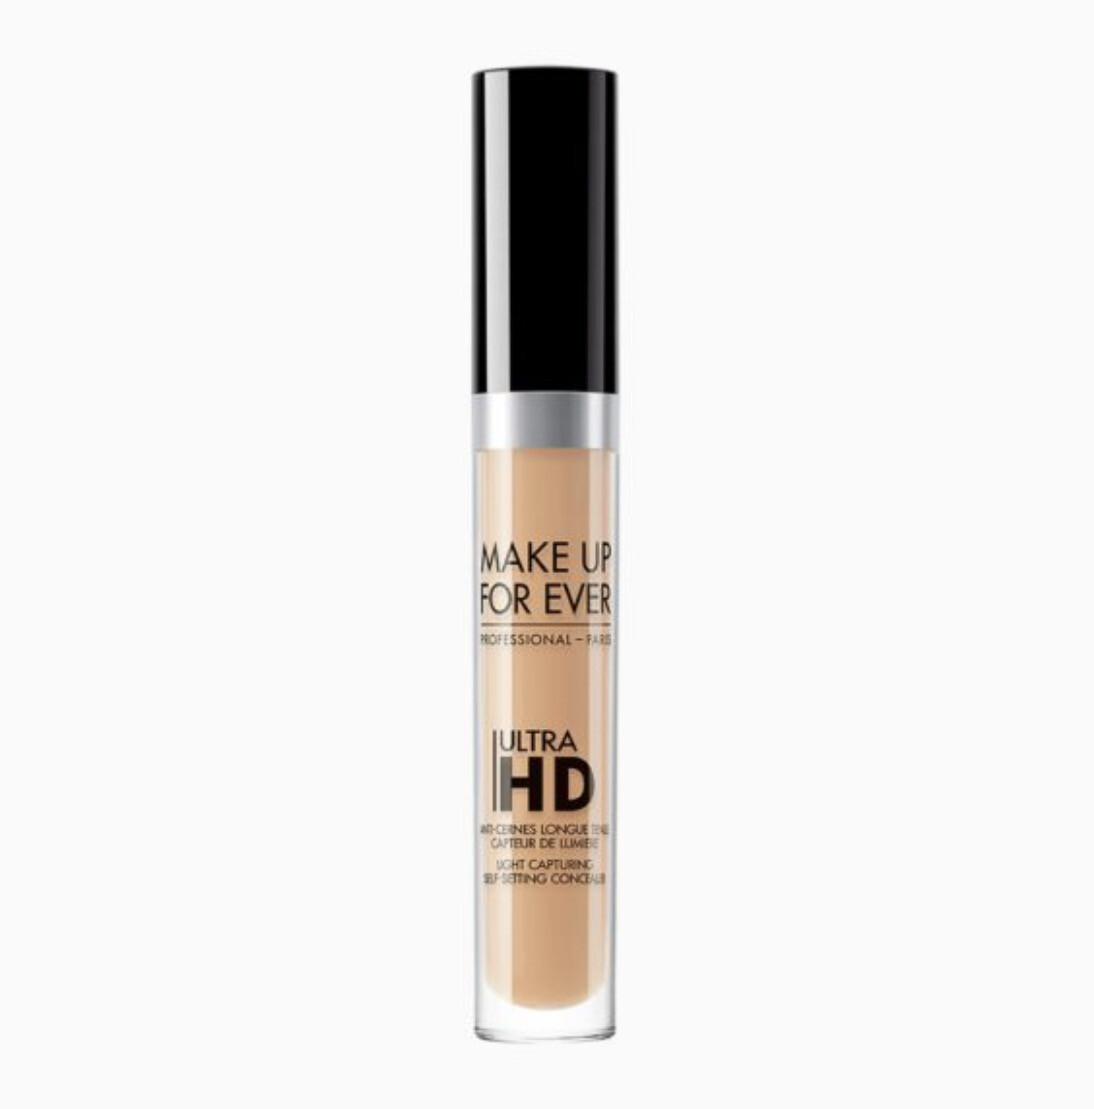 Make Up For Ever - Ultra HD Self-Setting Concealer | 31 Macadamia - for lighter medium skin with peach undertones